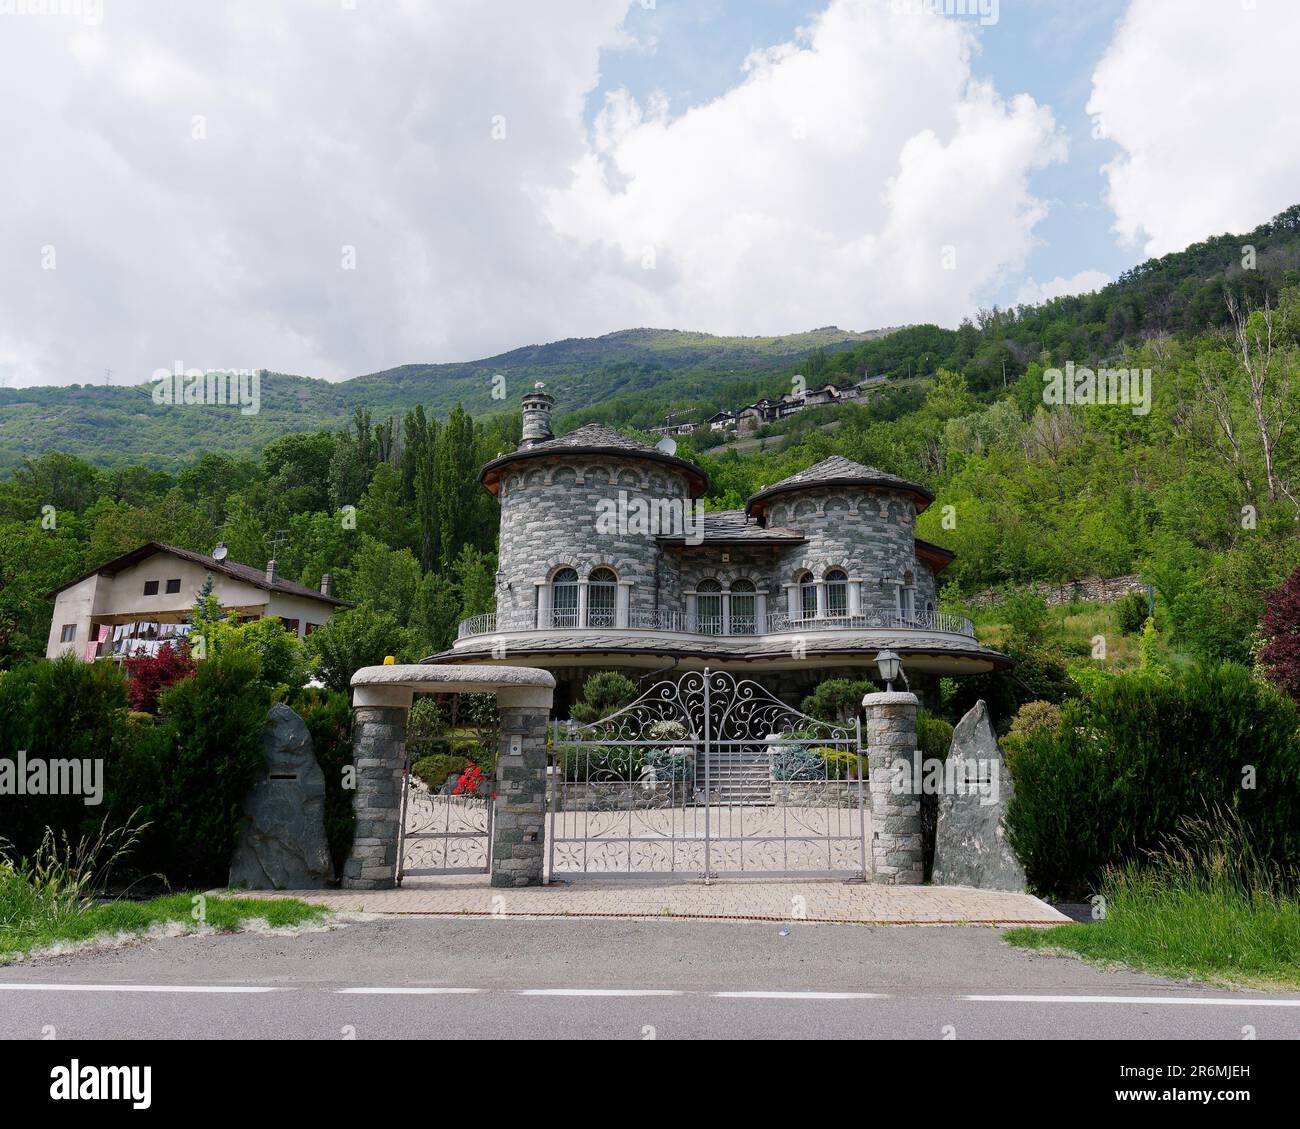 Very distinctive castle style stone built house with two towers, near Nus, Aosta Valley, Italy Stock Photo